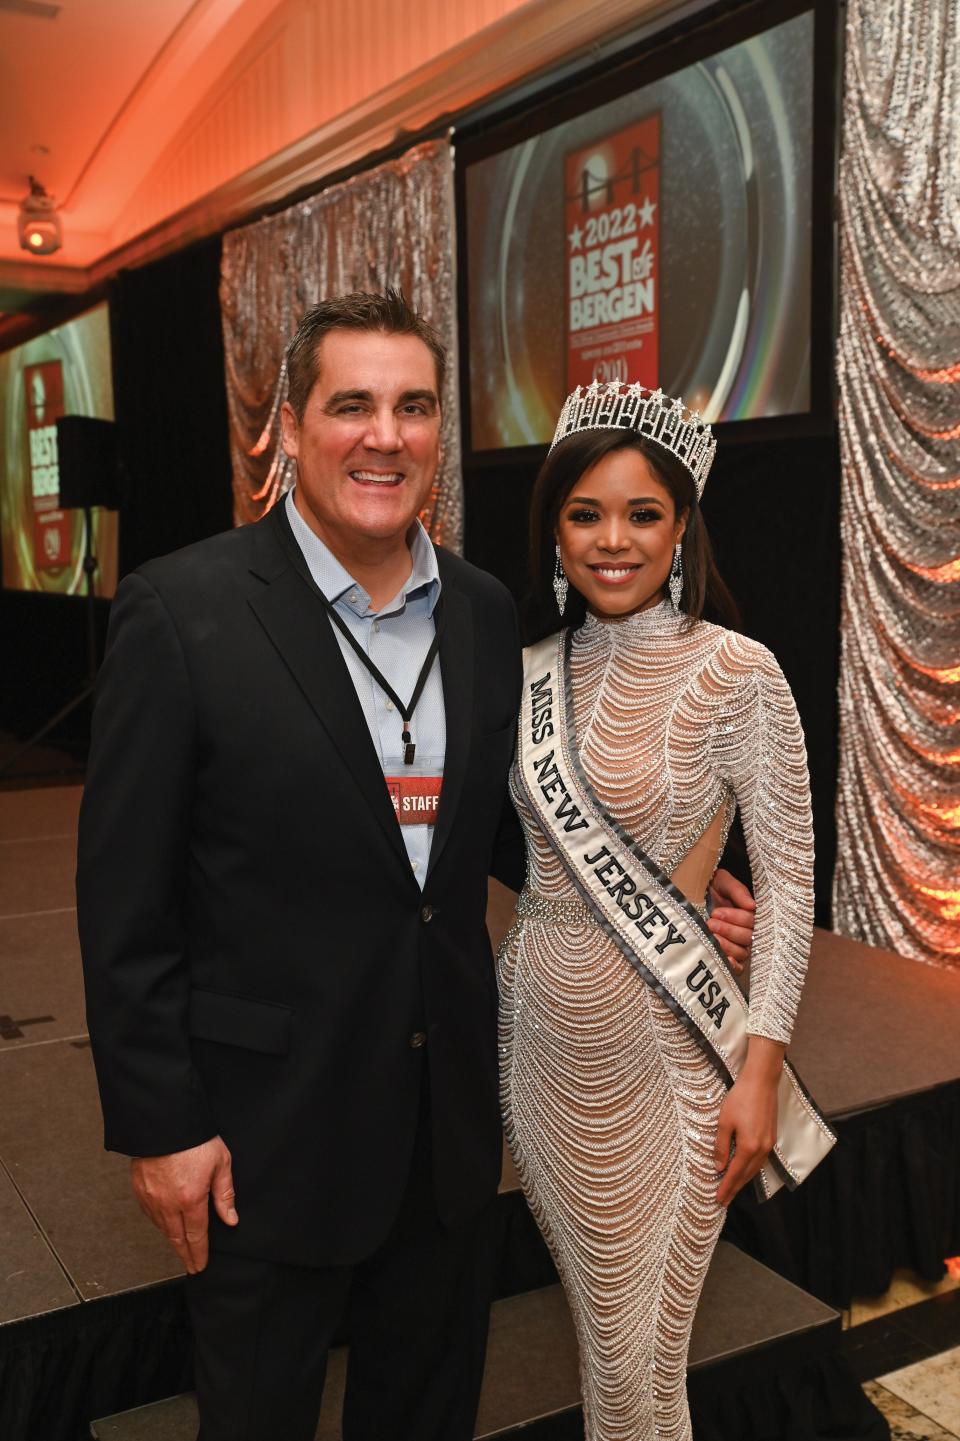 (201) Magazine's content and creative director John Flynn poses with Miss New Jersey, USA 2021 and  Fair Lawn resident Celinda Ortega at the first annual Best of Bergen Gala on March 9, 2022.